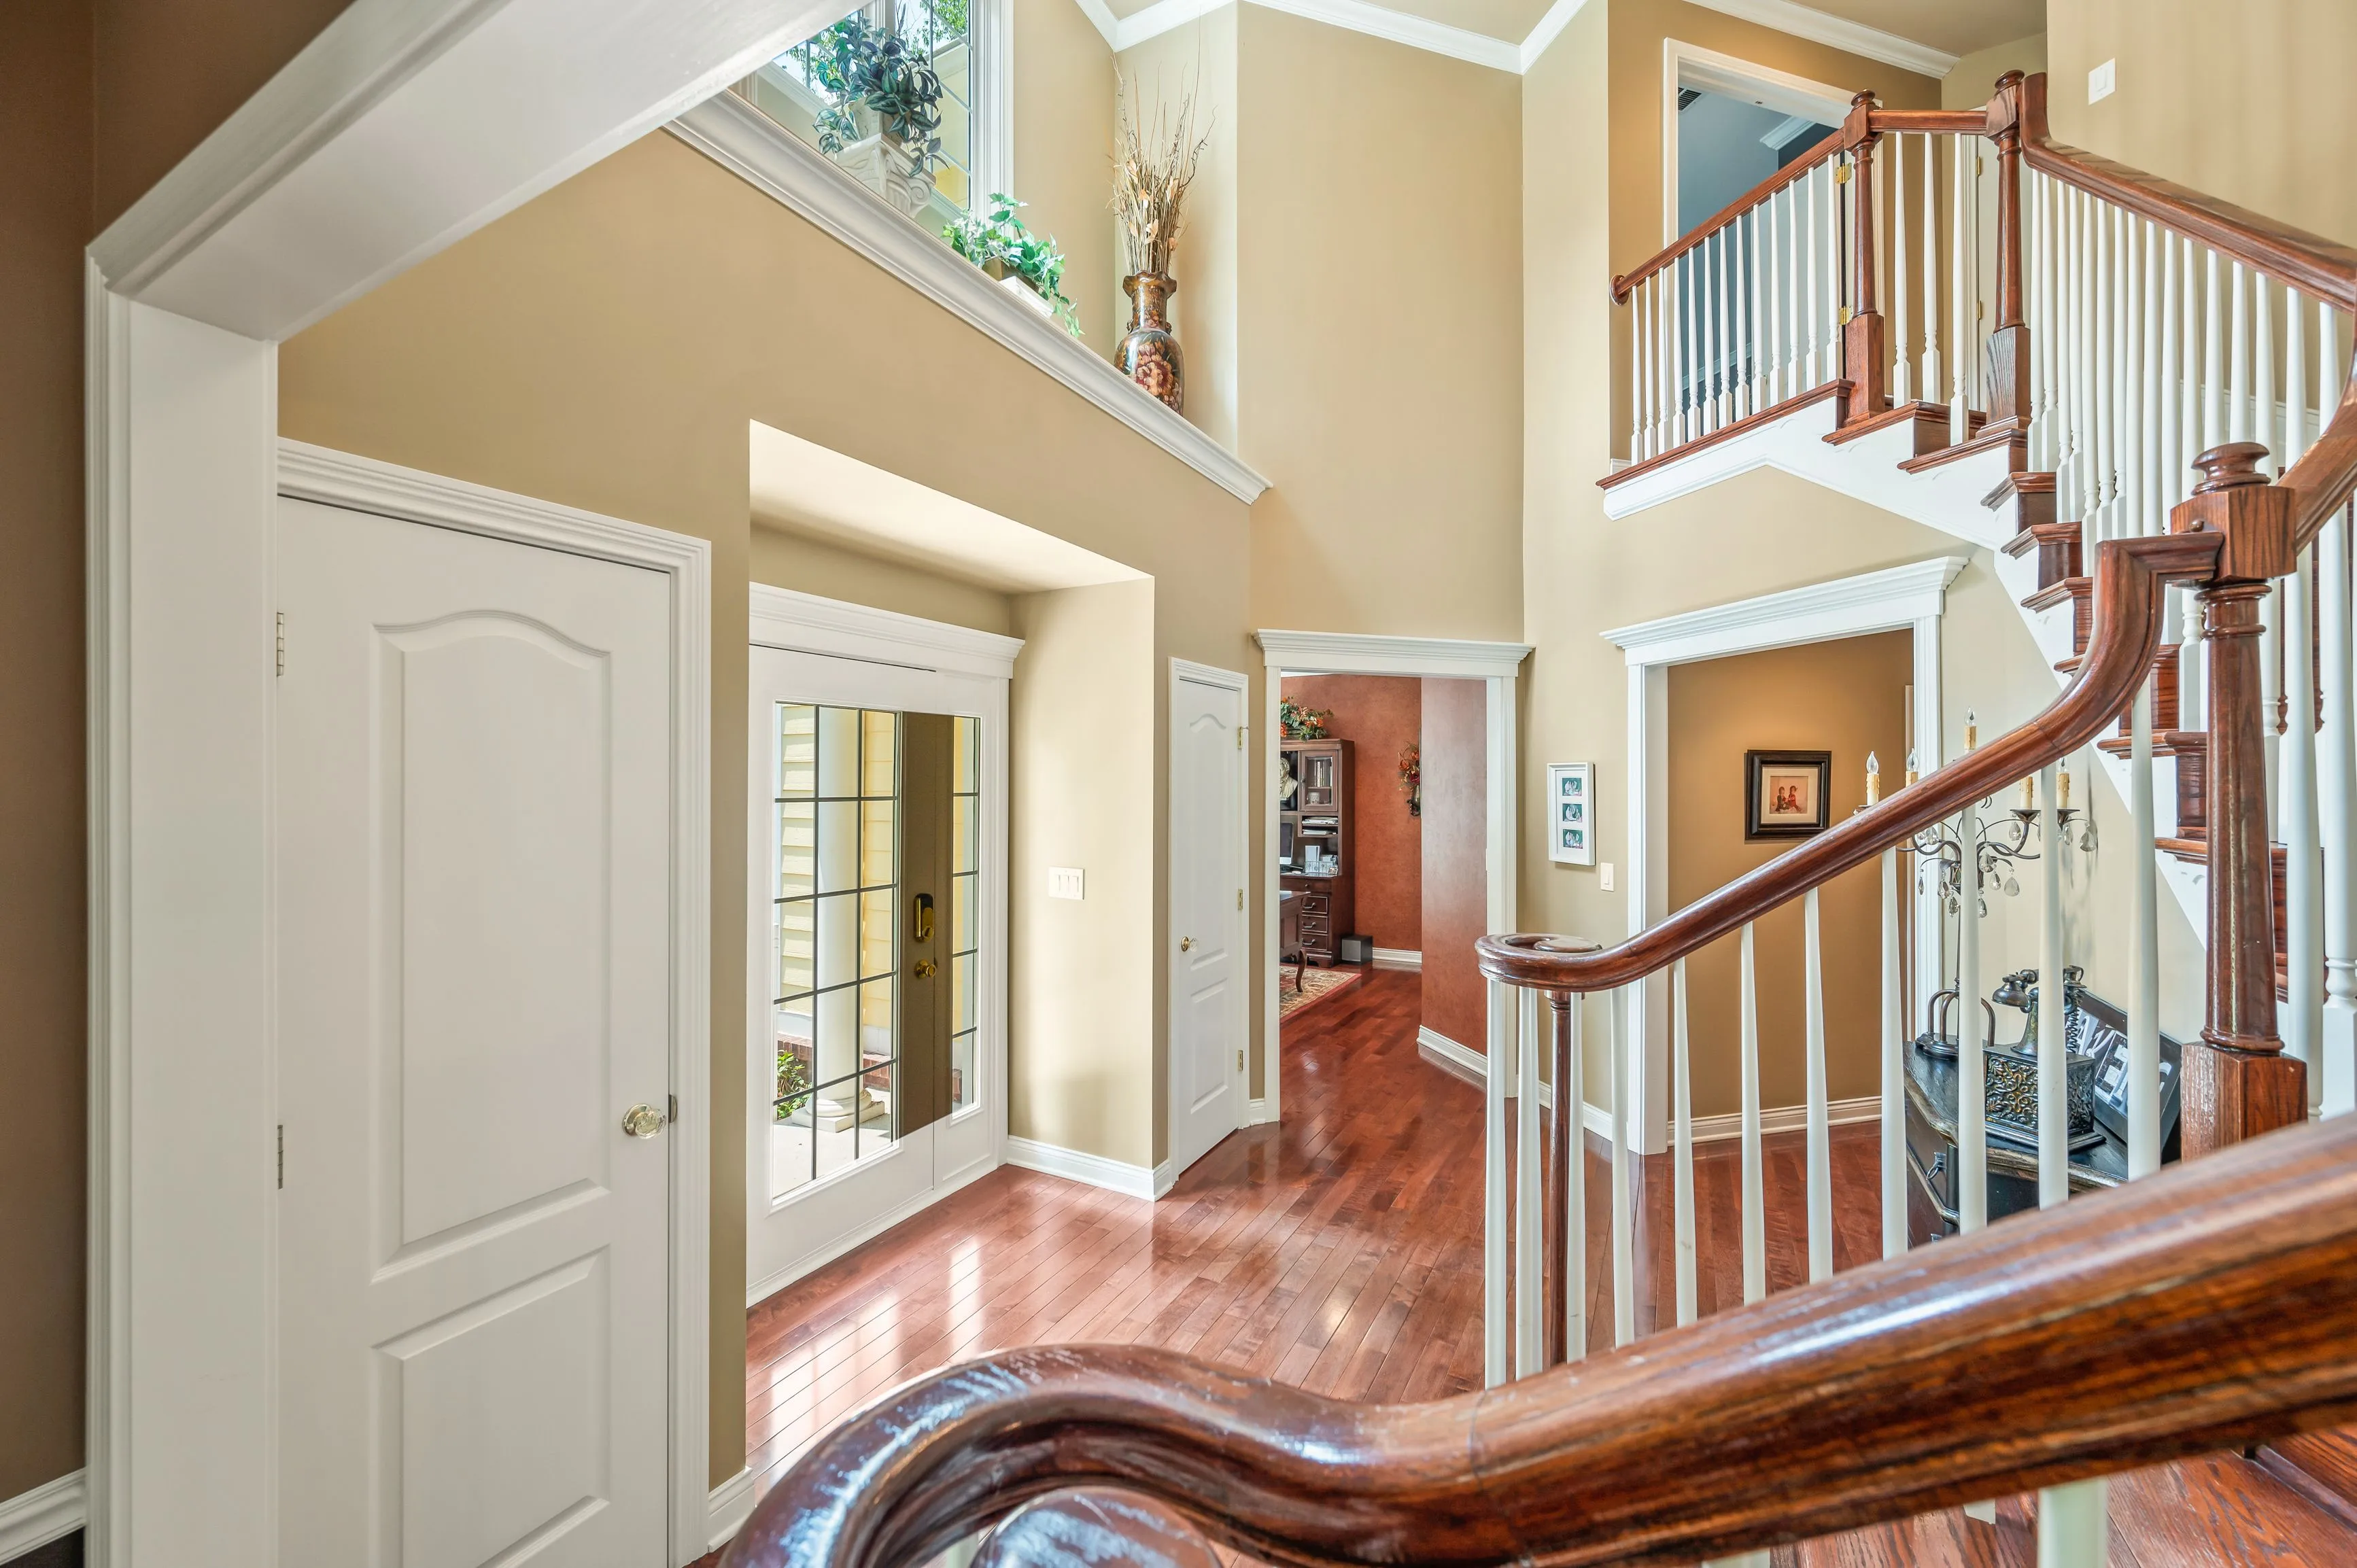 Interior view of a home entryway with staircase and hardwood floors.